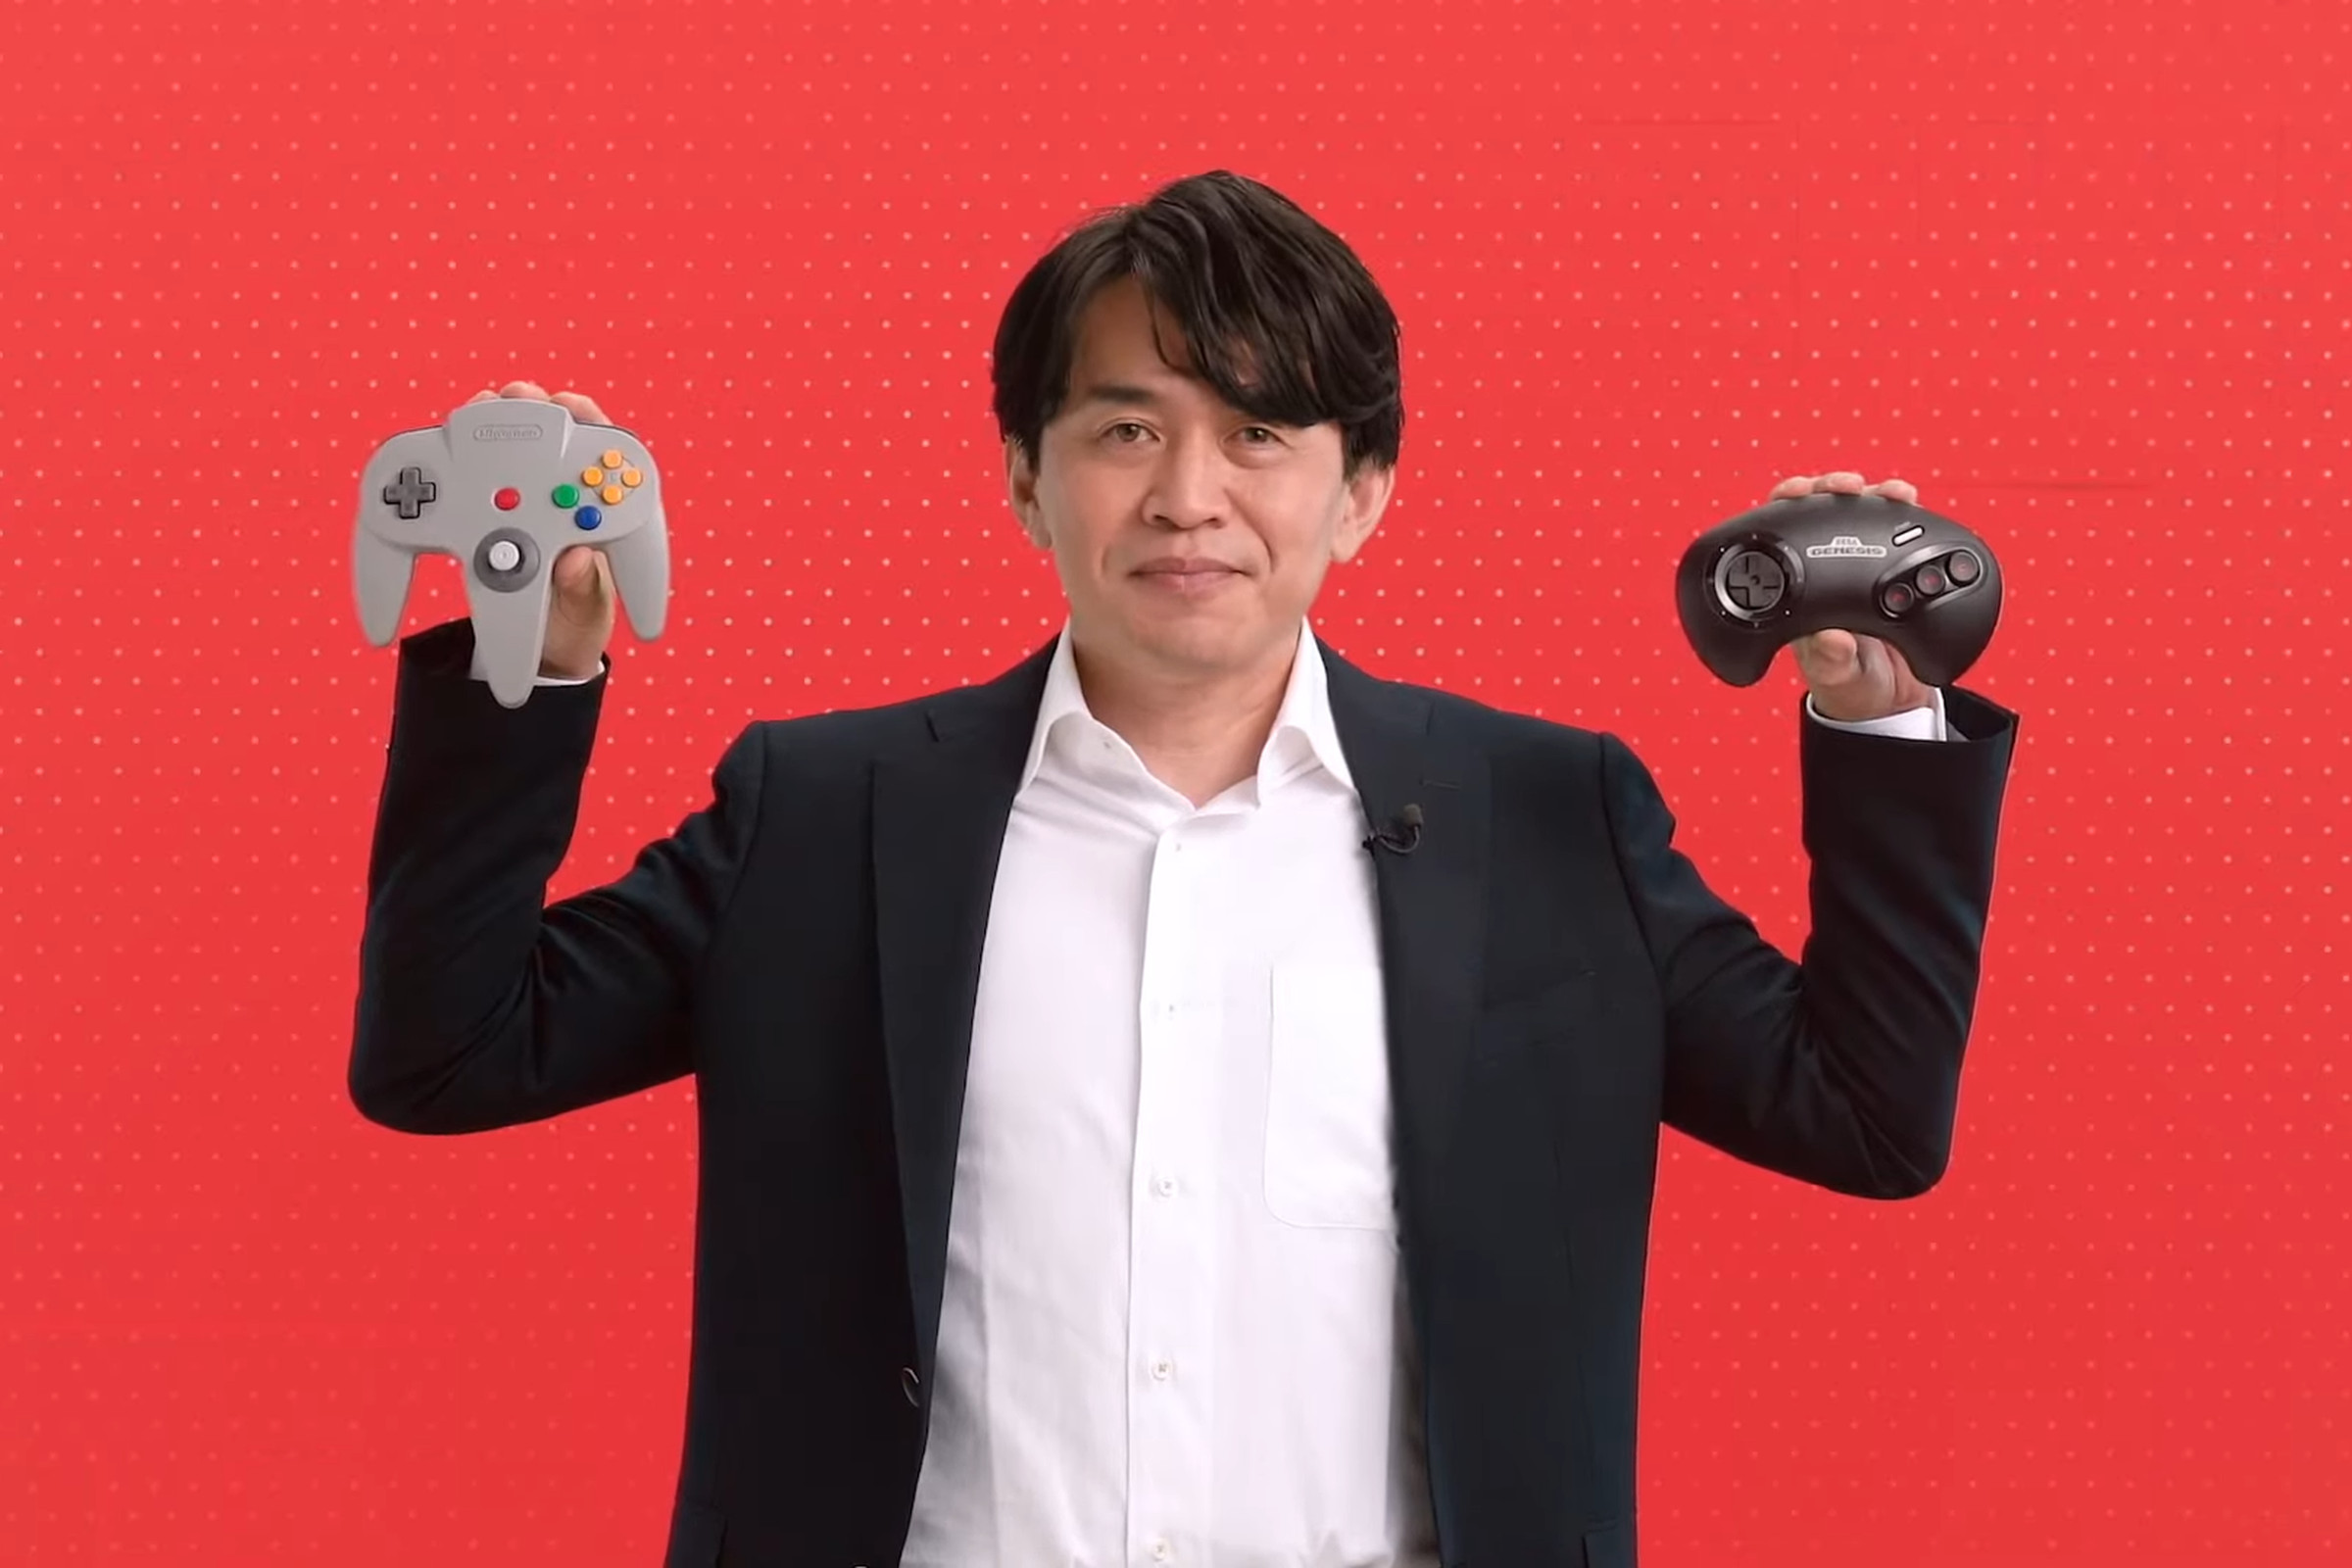 The upcoming Nintendo 64 and Sega Genesis controllers for Switch.